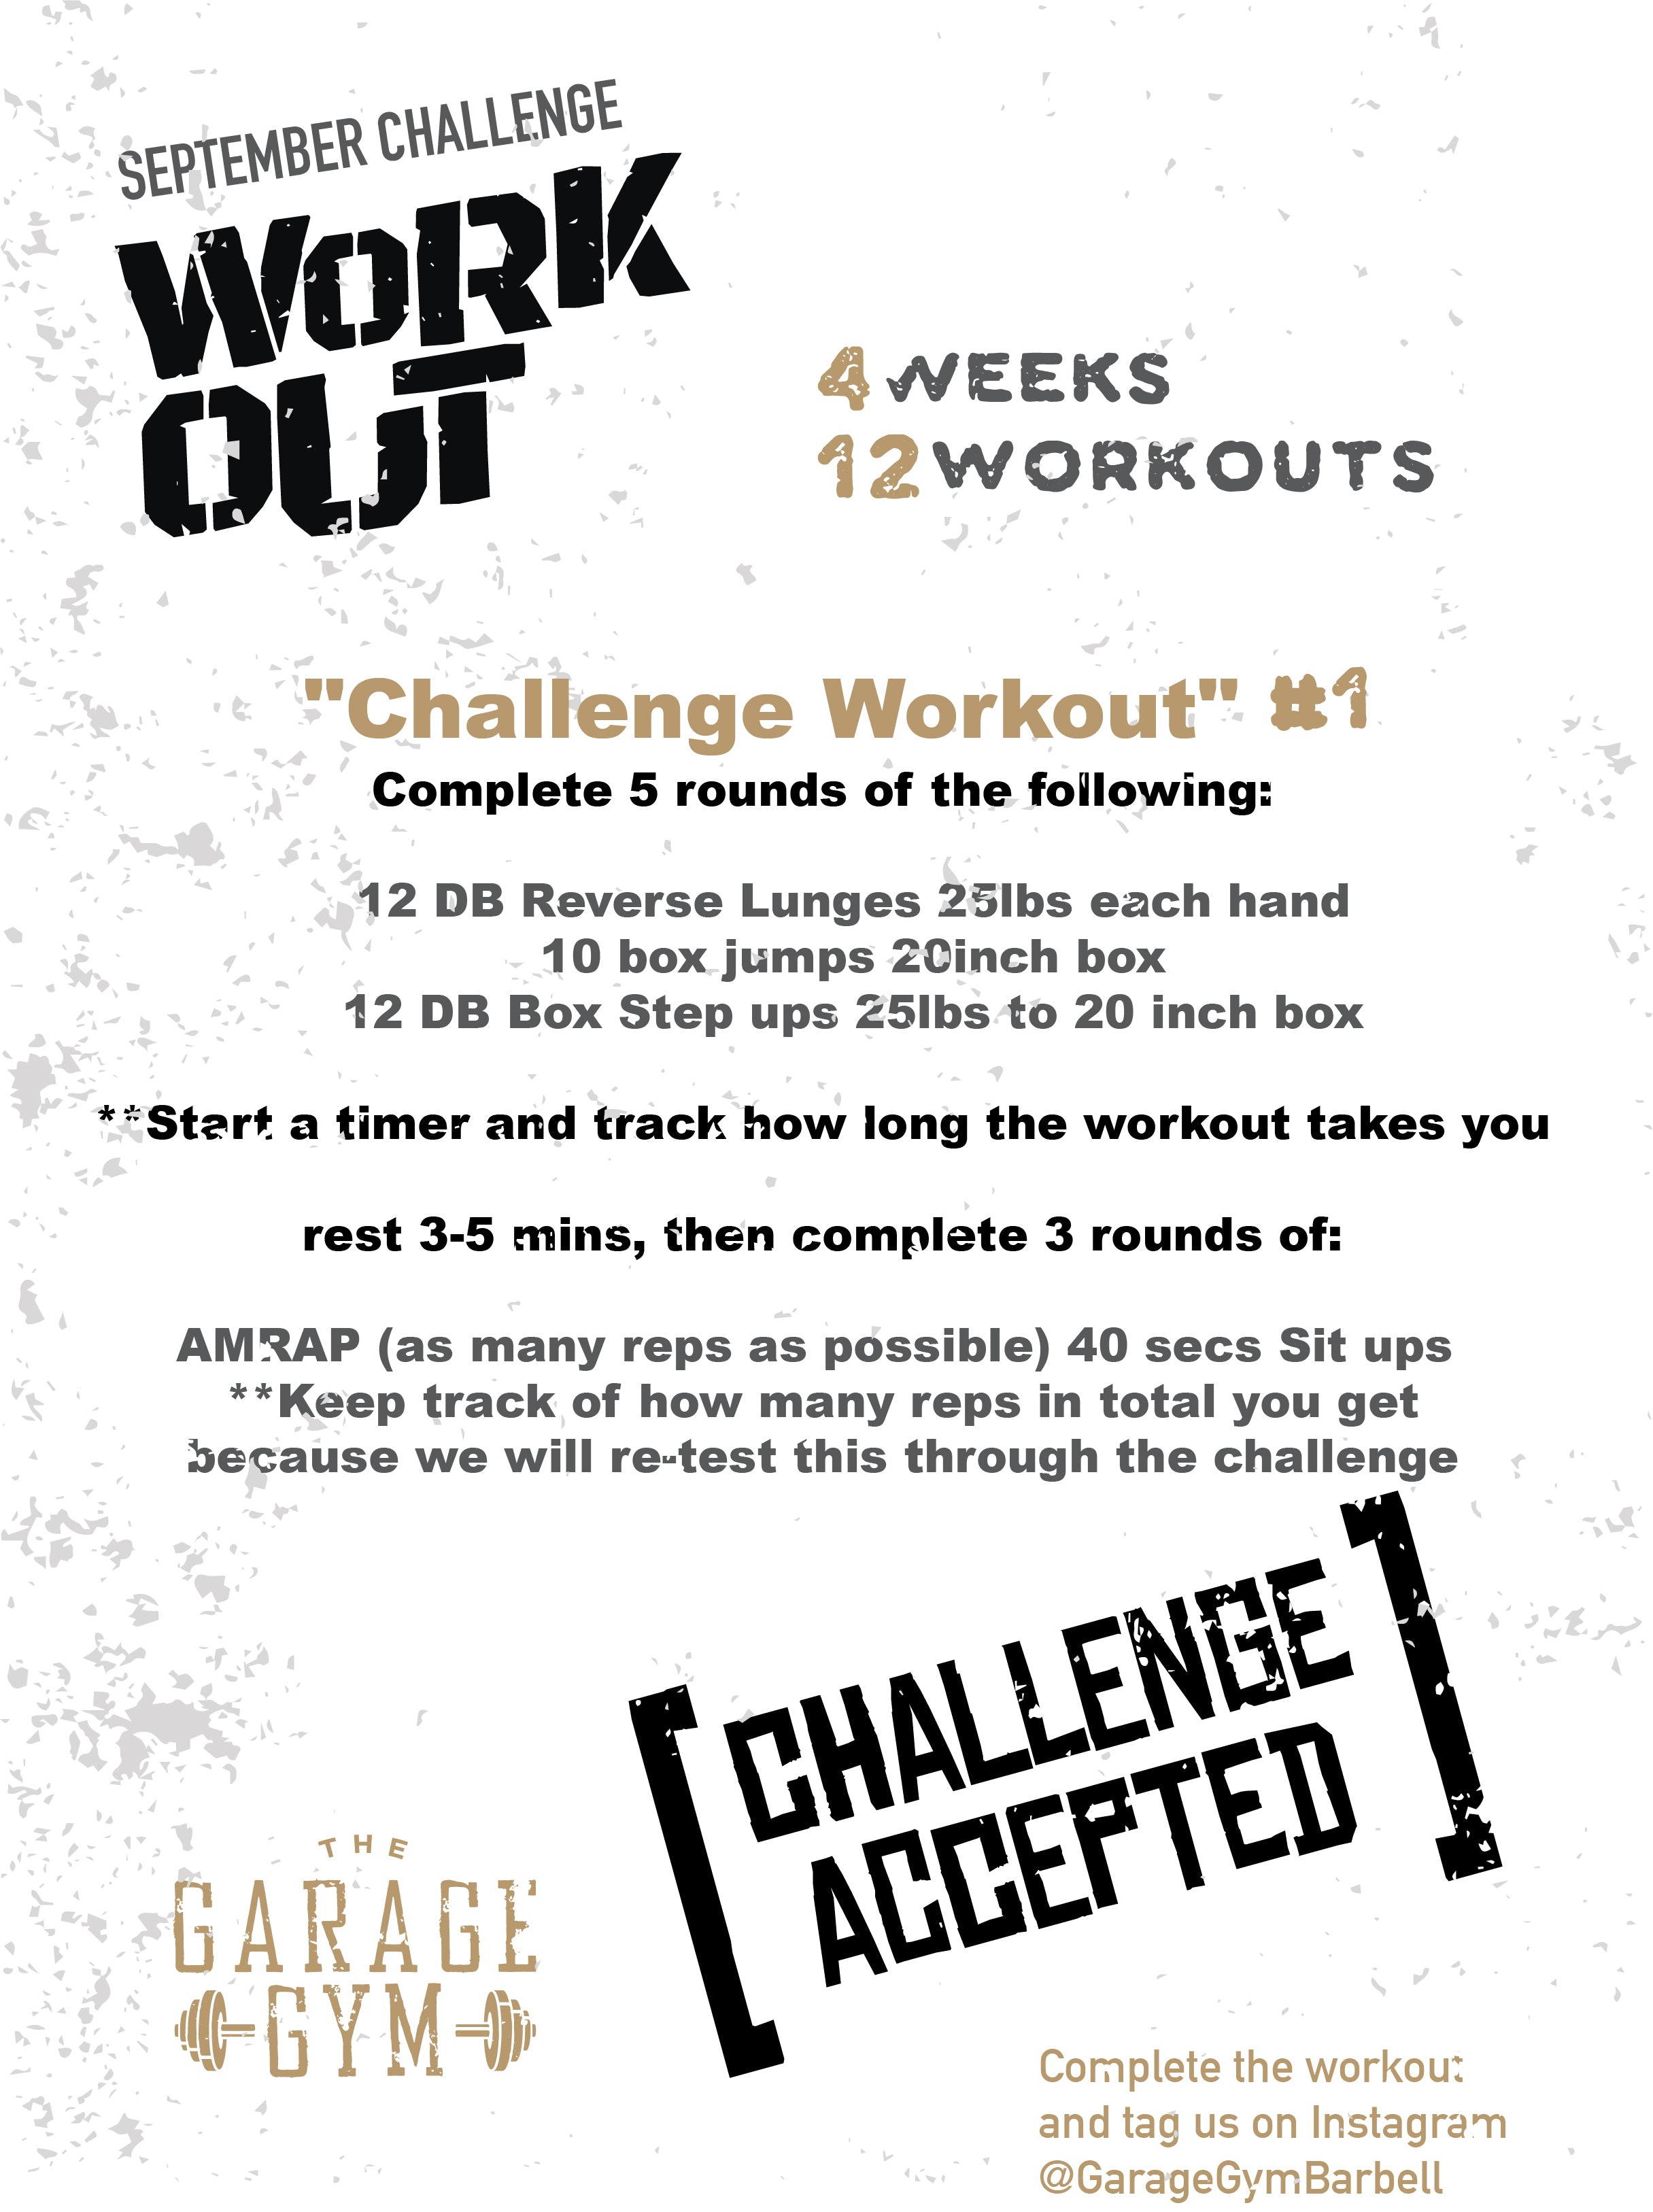 9-2-19 Lower Body with September "Challenge Workout"